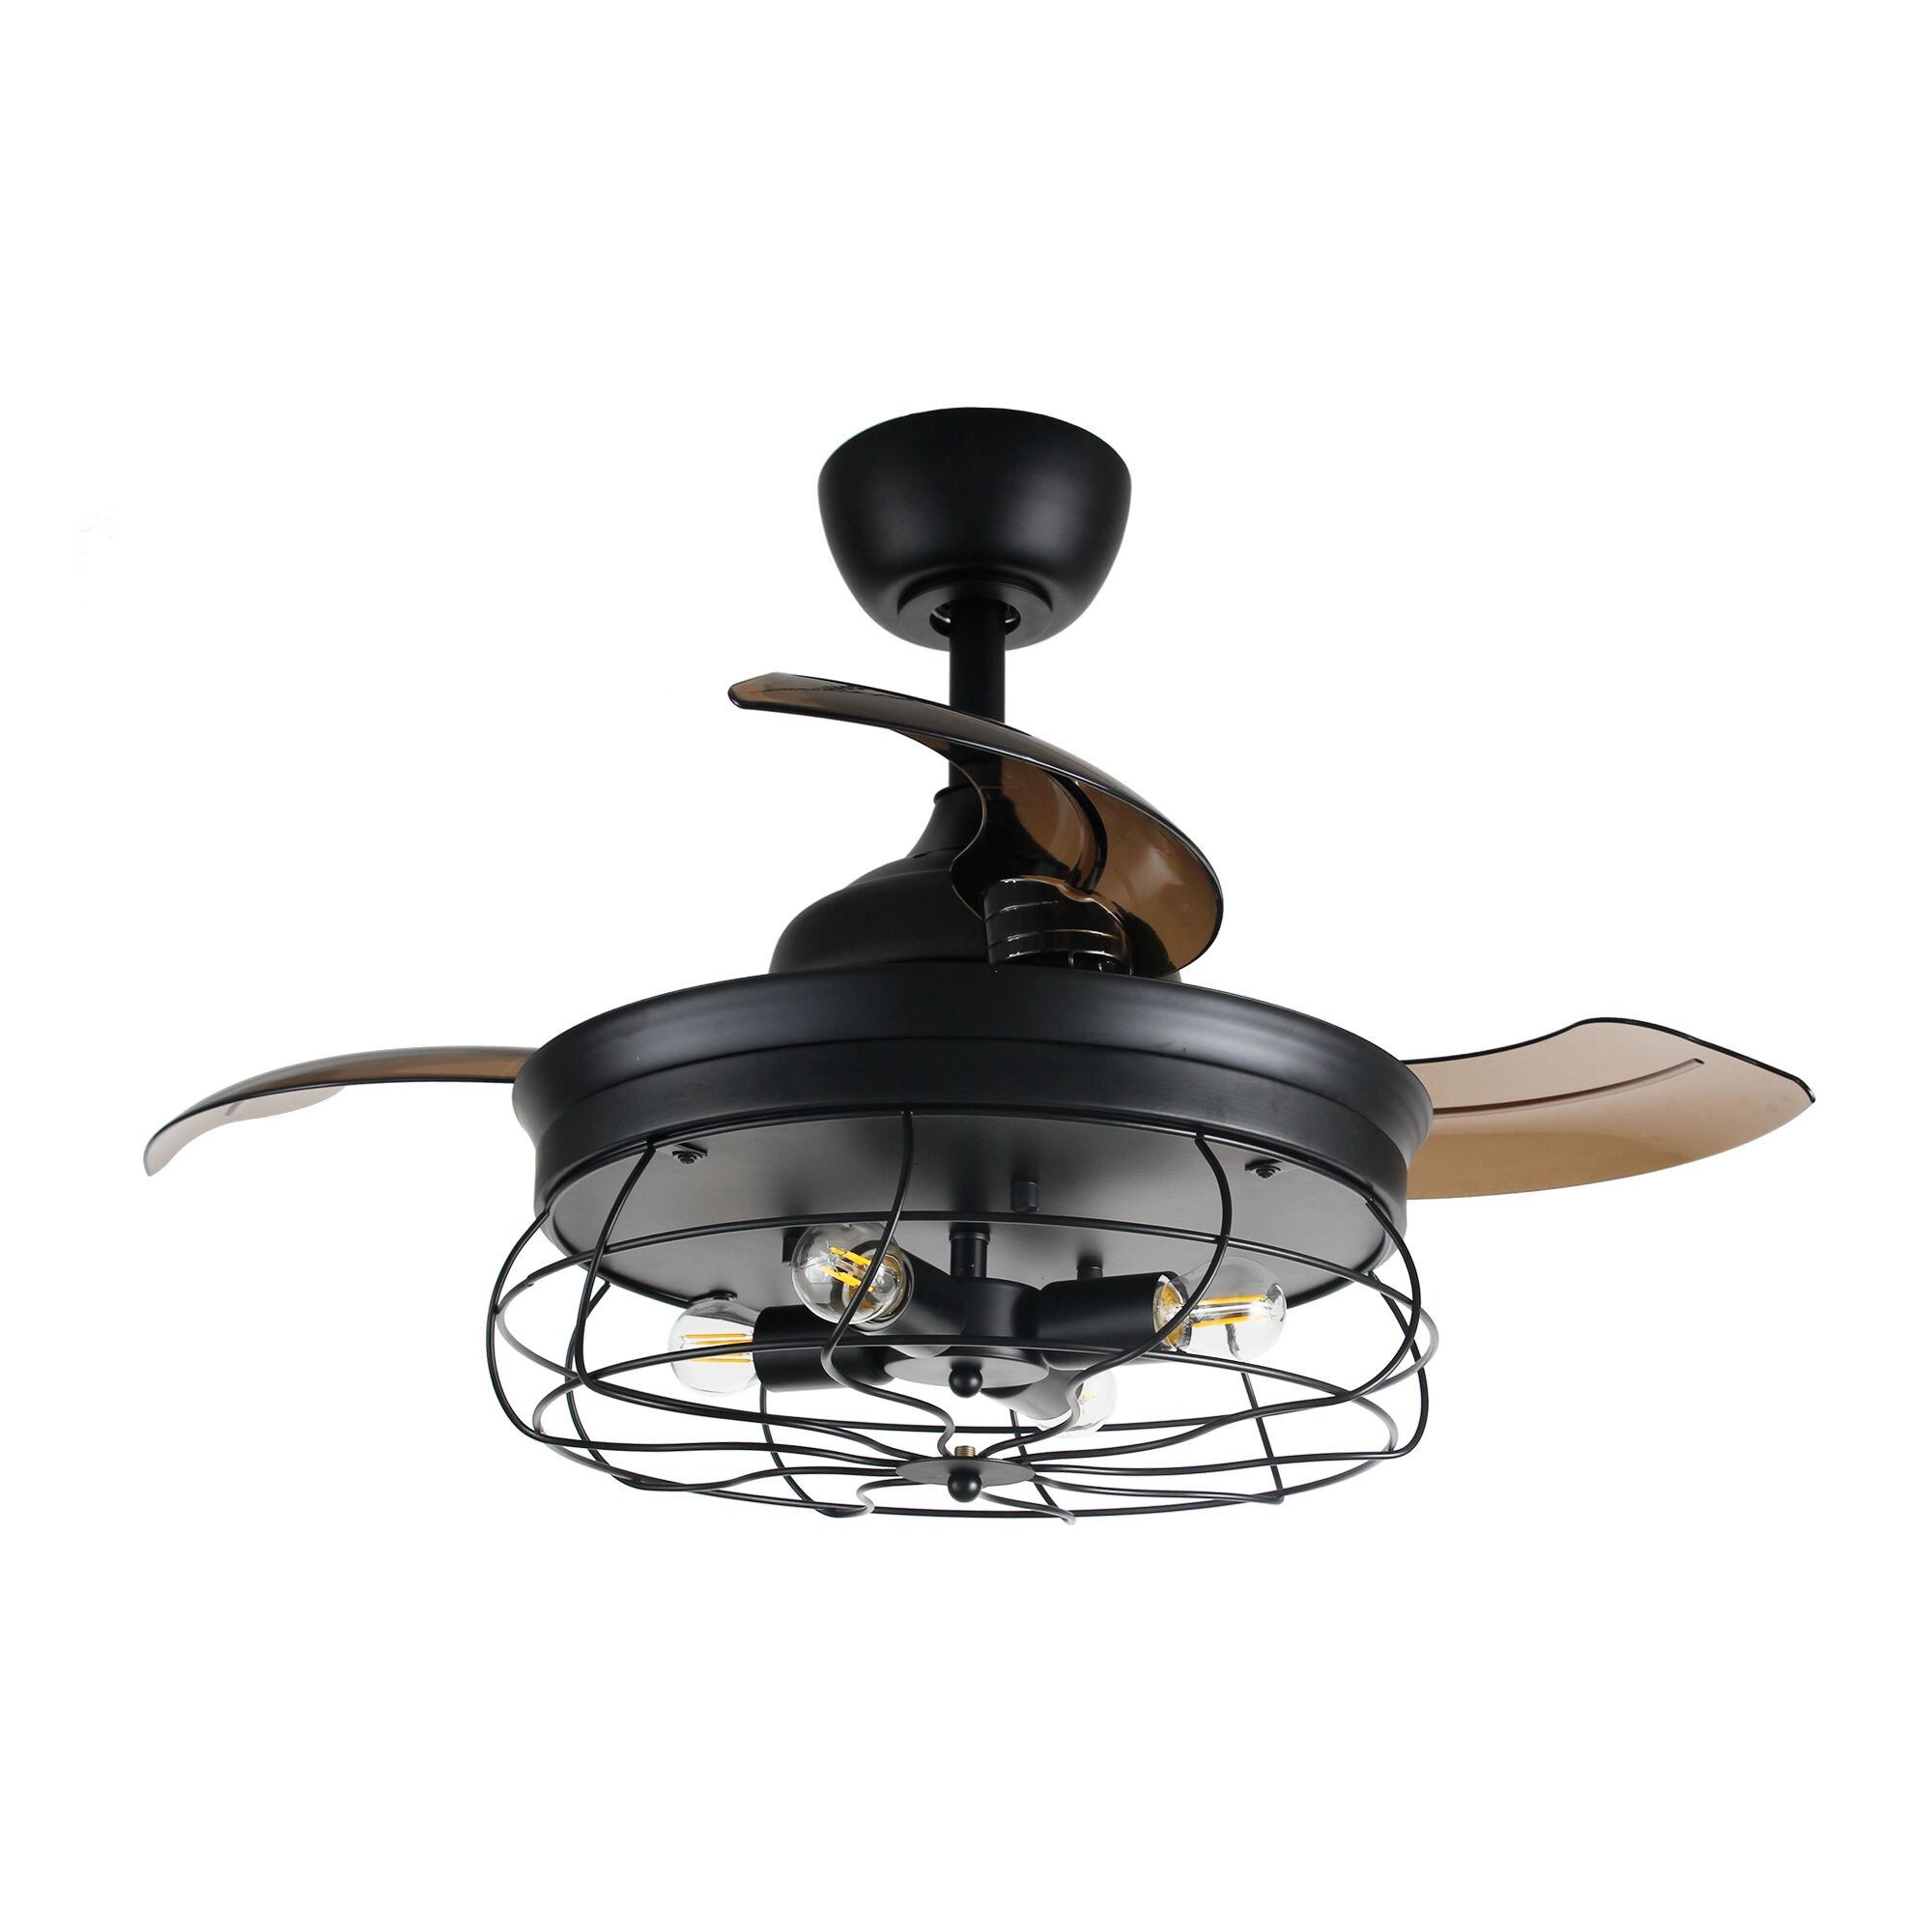 Led Indoor Chandelier Ceiling Fan, 26 9 In Black Industrial 3 Blades Ceiling Fan With Remote Control